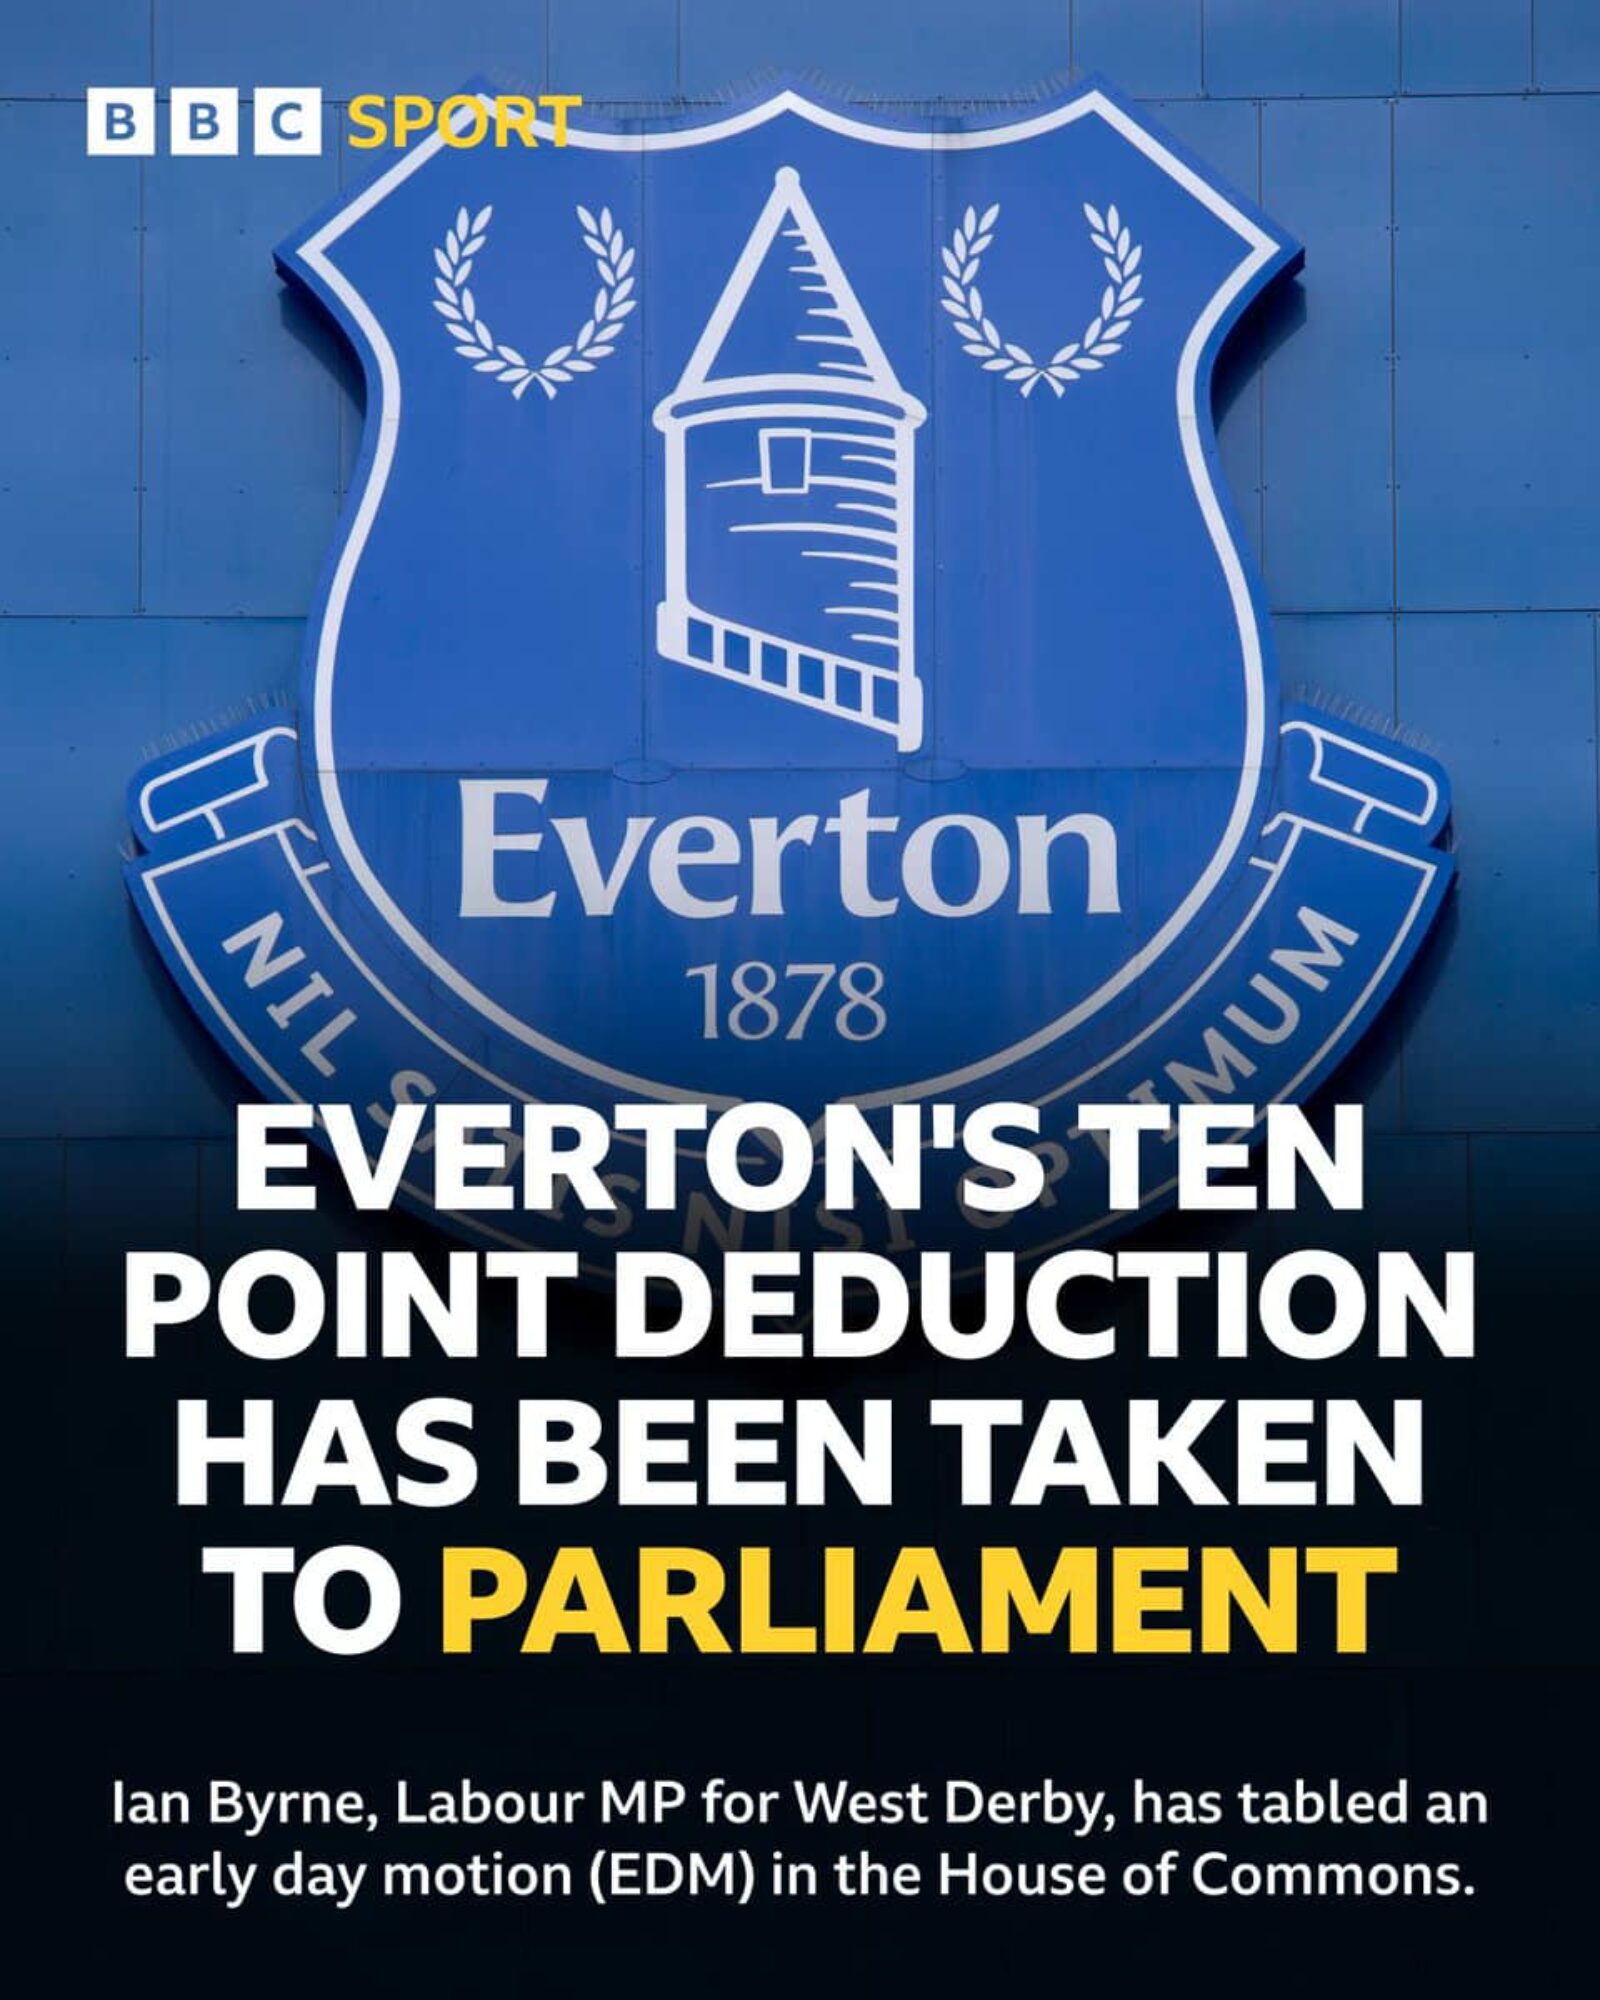 Everton Badge with text: Everton Ten Point Decuction Has Been Taken To Parliament